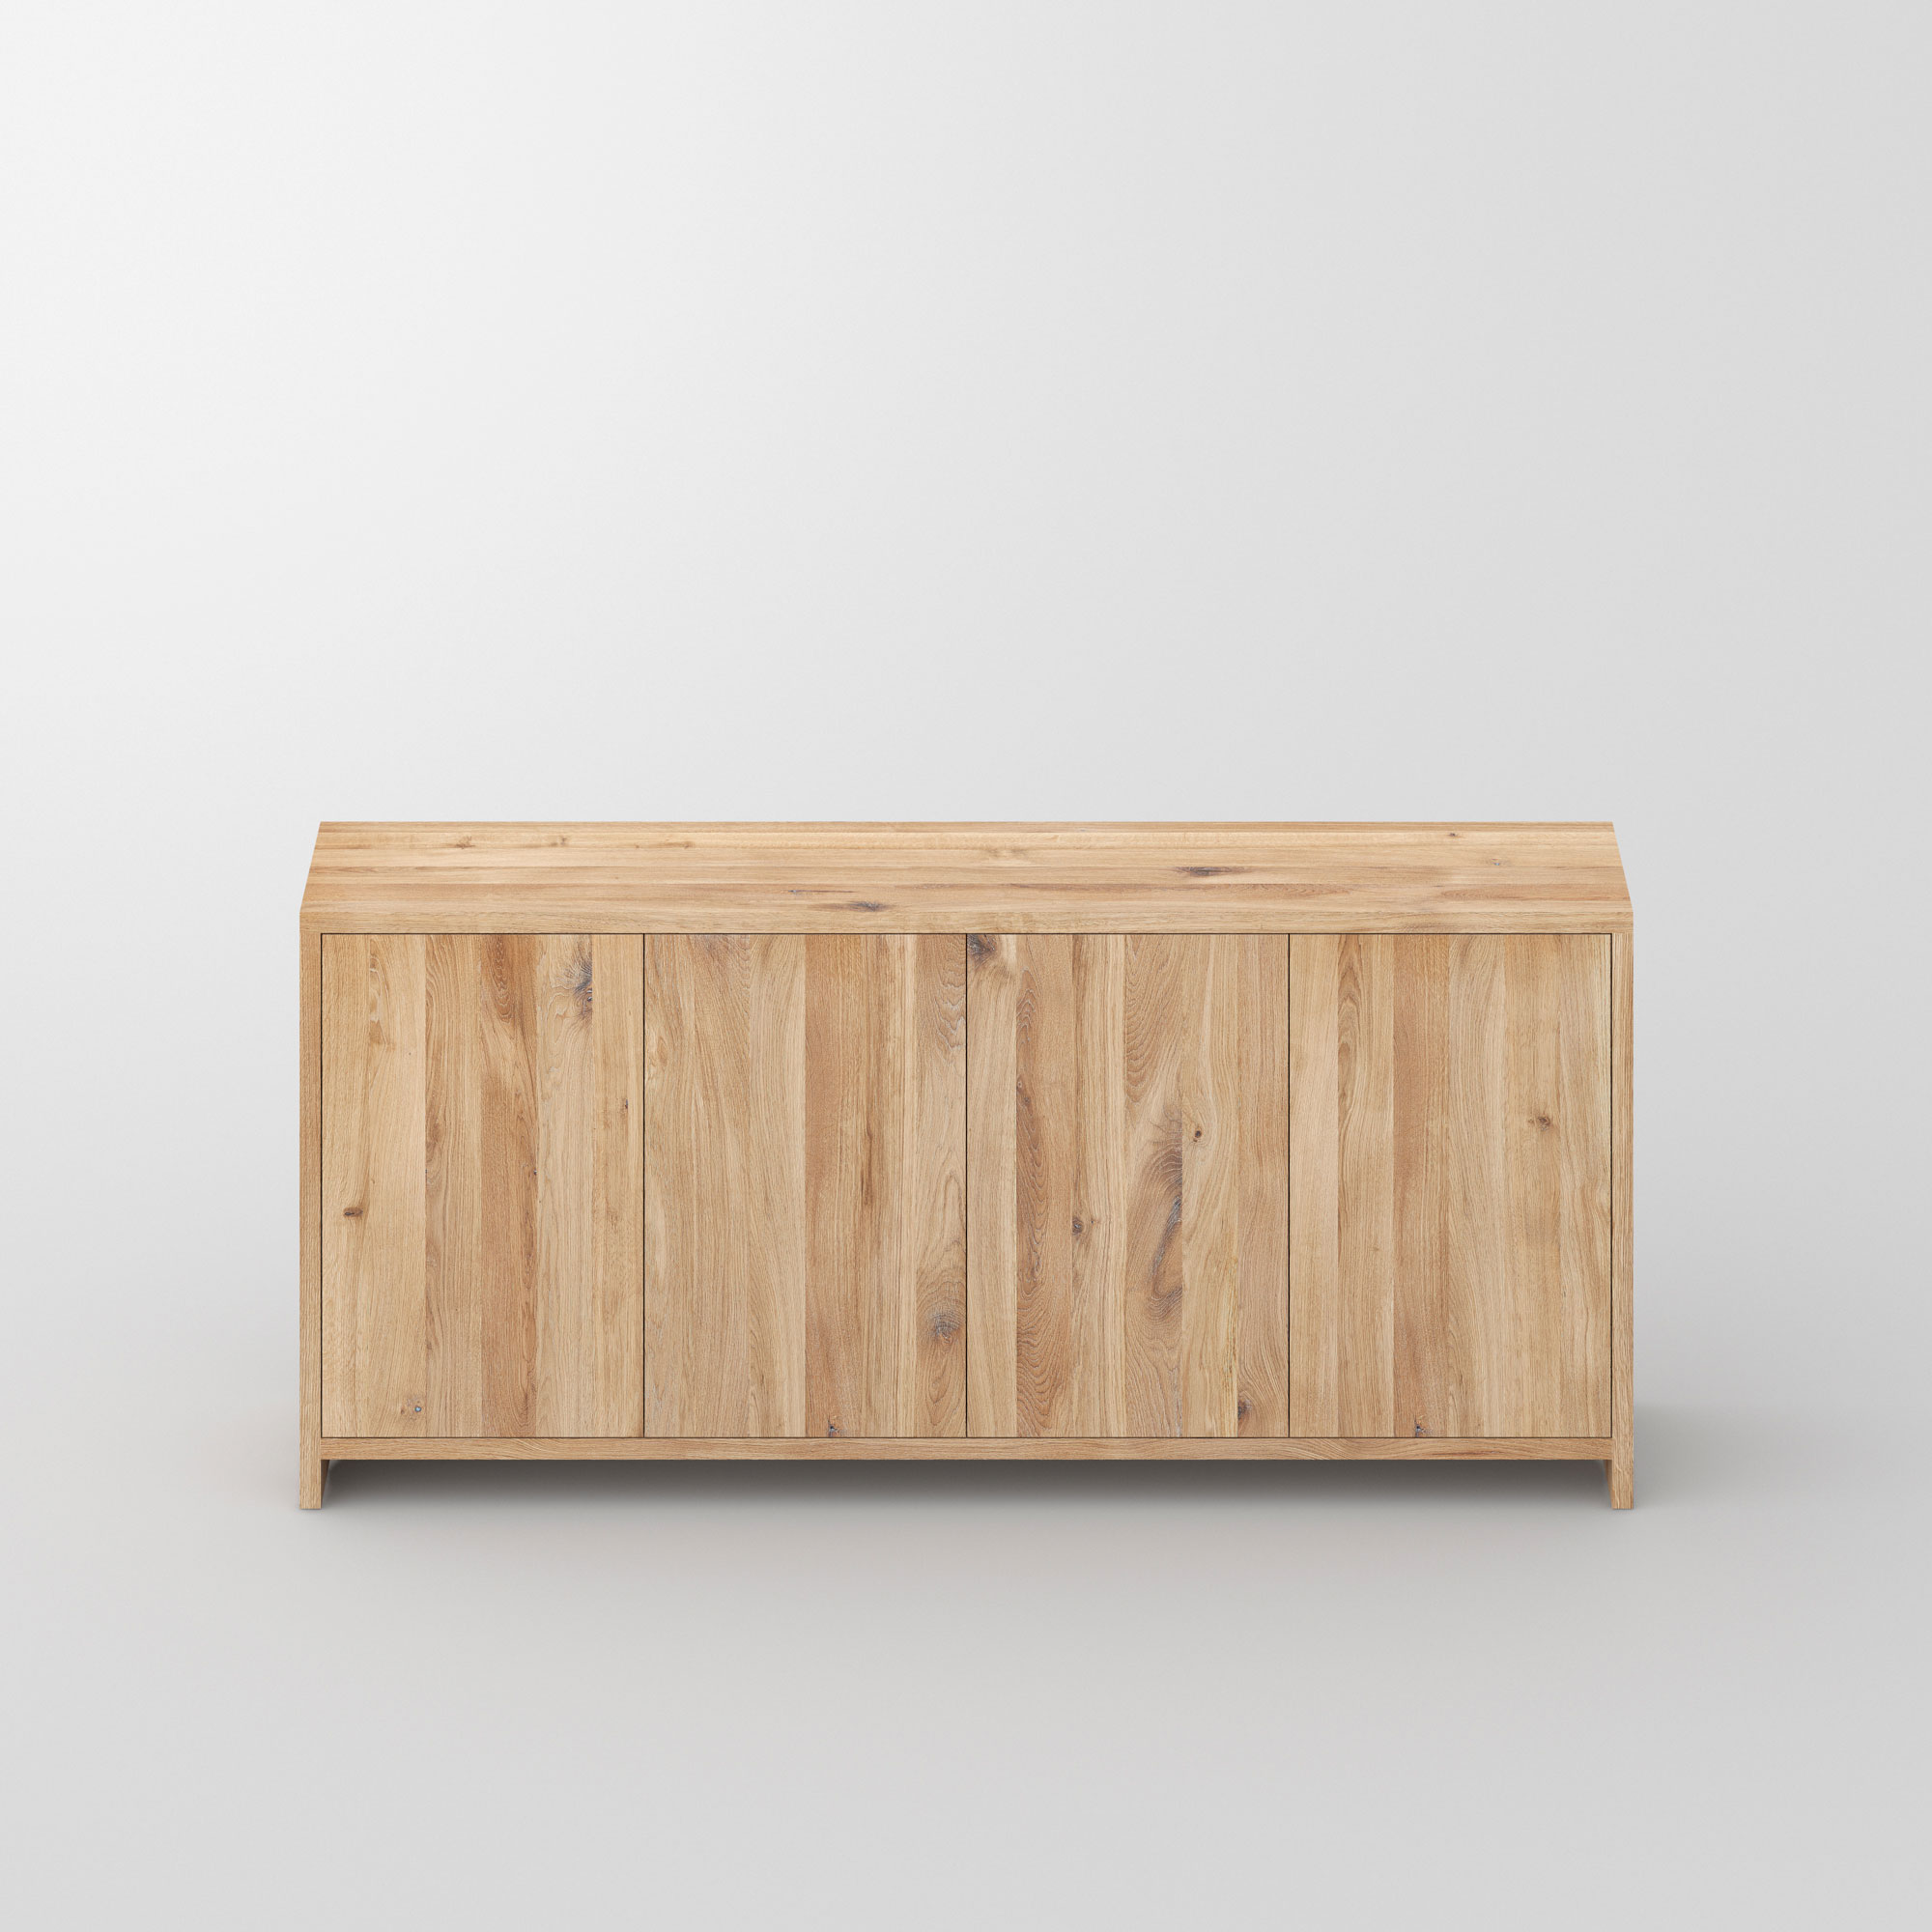 Tailor-Made Sideboard MENA F cam2 custom made in solid wood by vitamin design